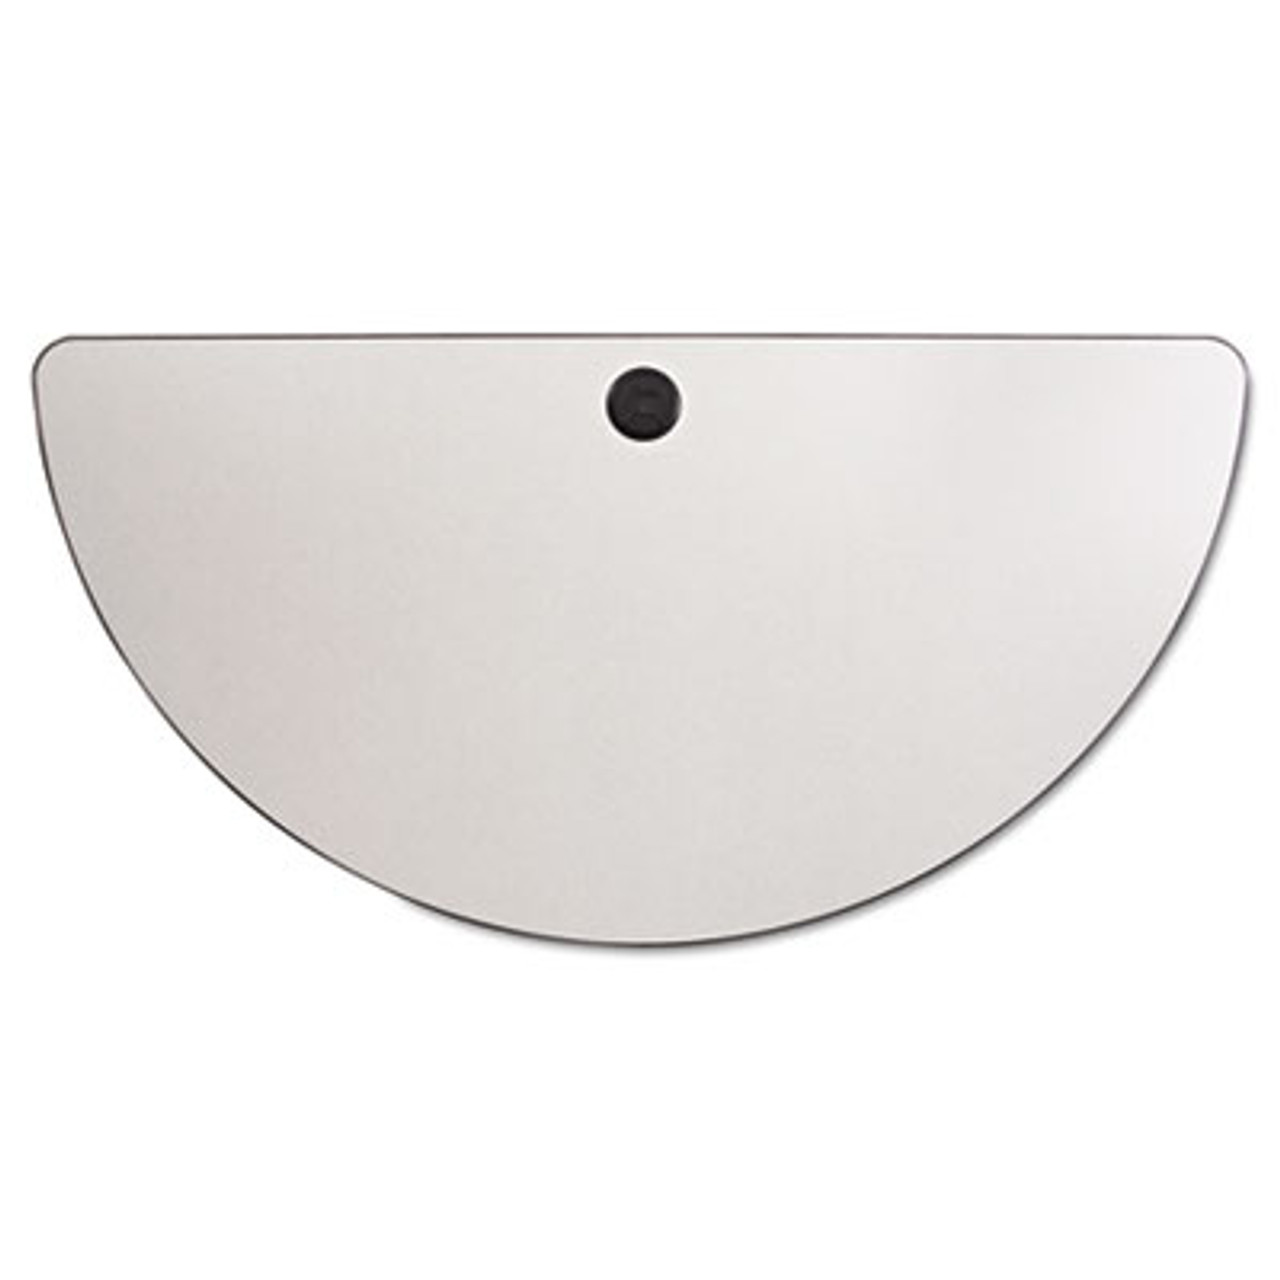 Valencia Series Training Table Top, Half-Round, 47-1/4w x 23-5/8d, Speckled Gray